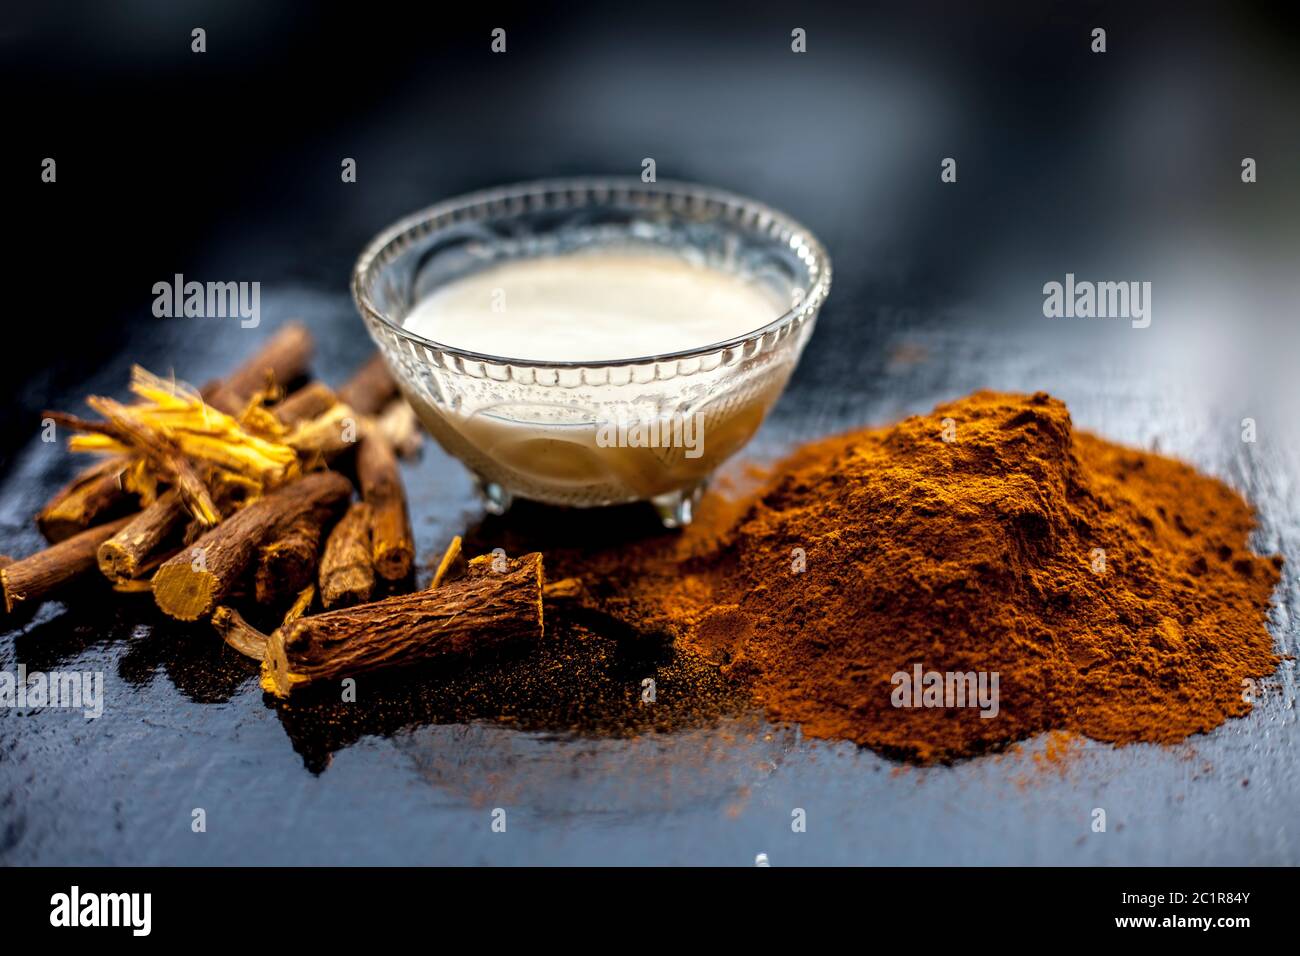 Face mask for Melasma consisting of Revand chini's powder, and milk. Shot of raw revand chini roots, powder, and milk. Stock Photo